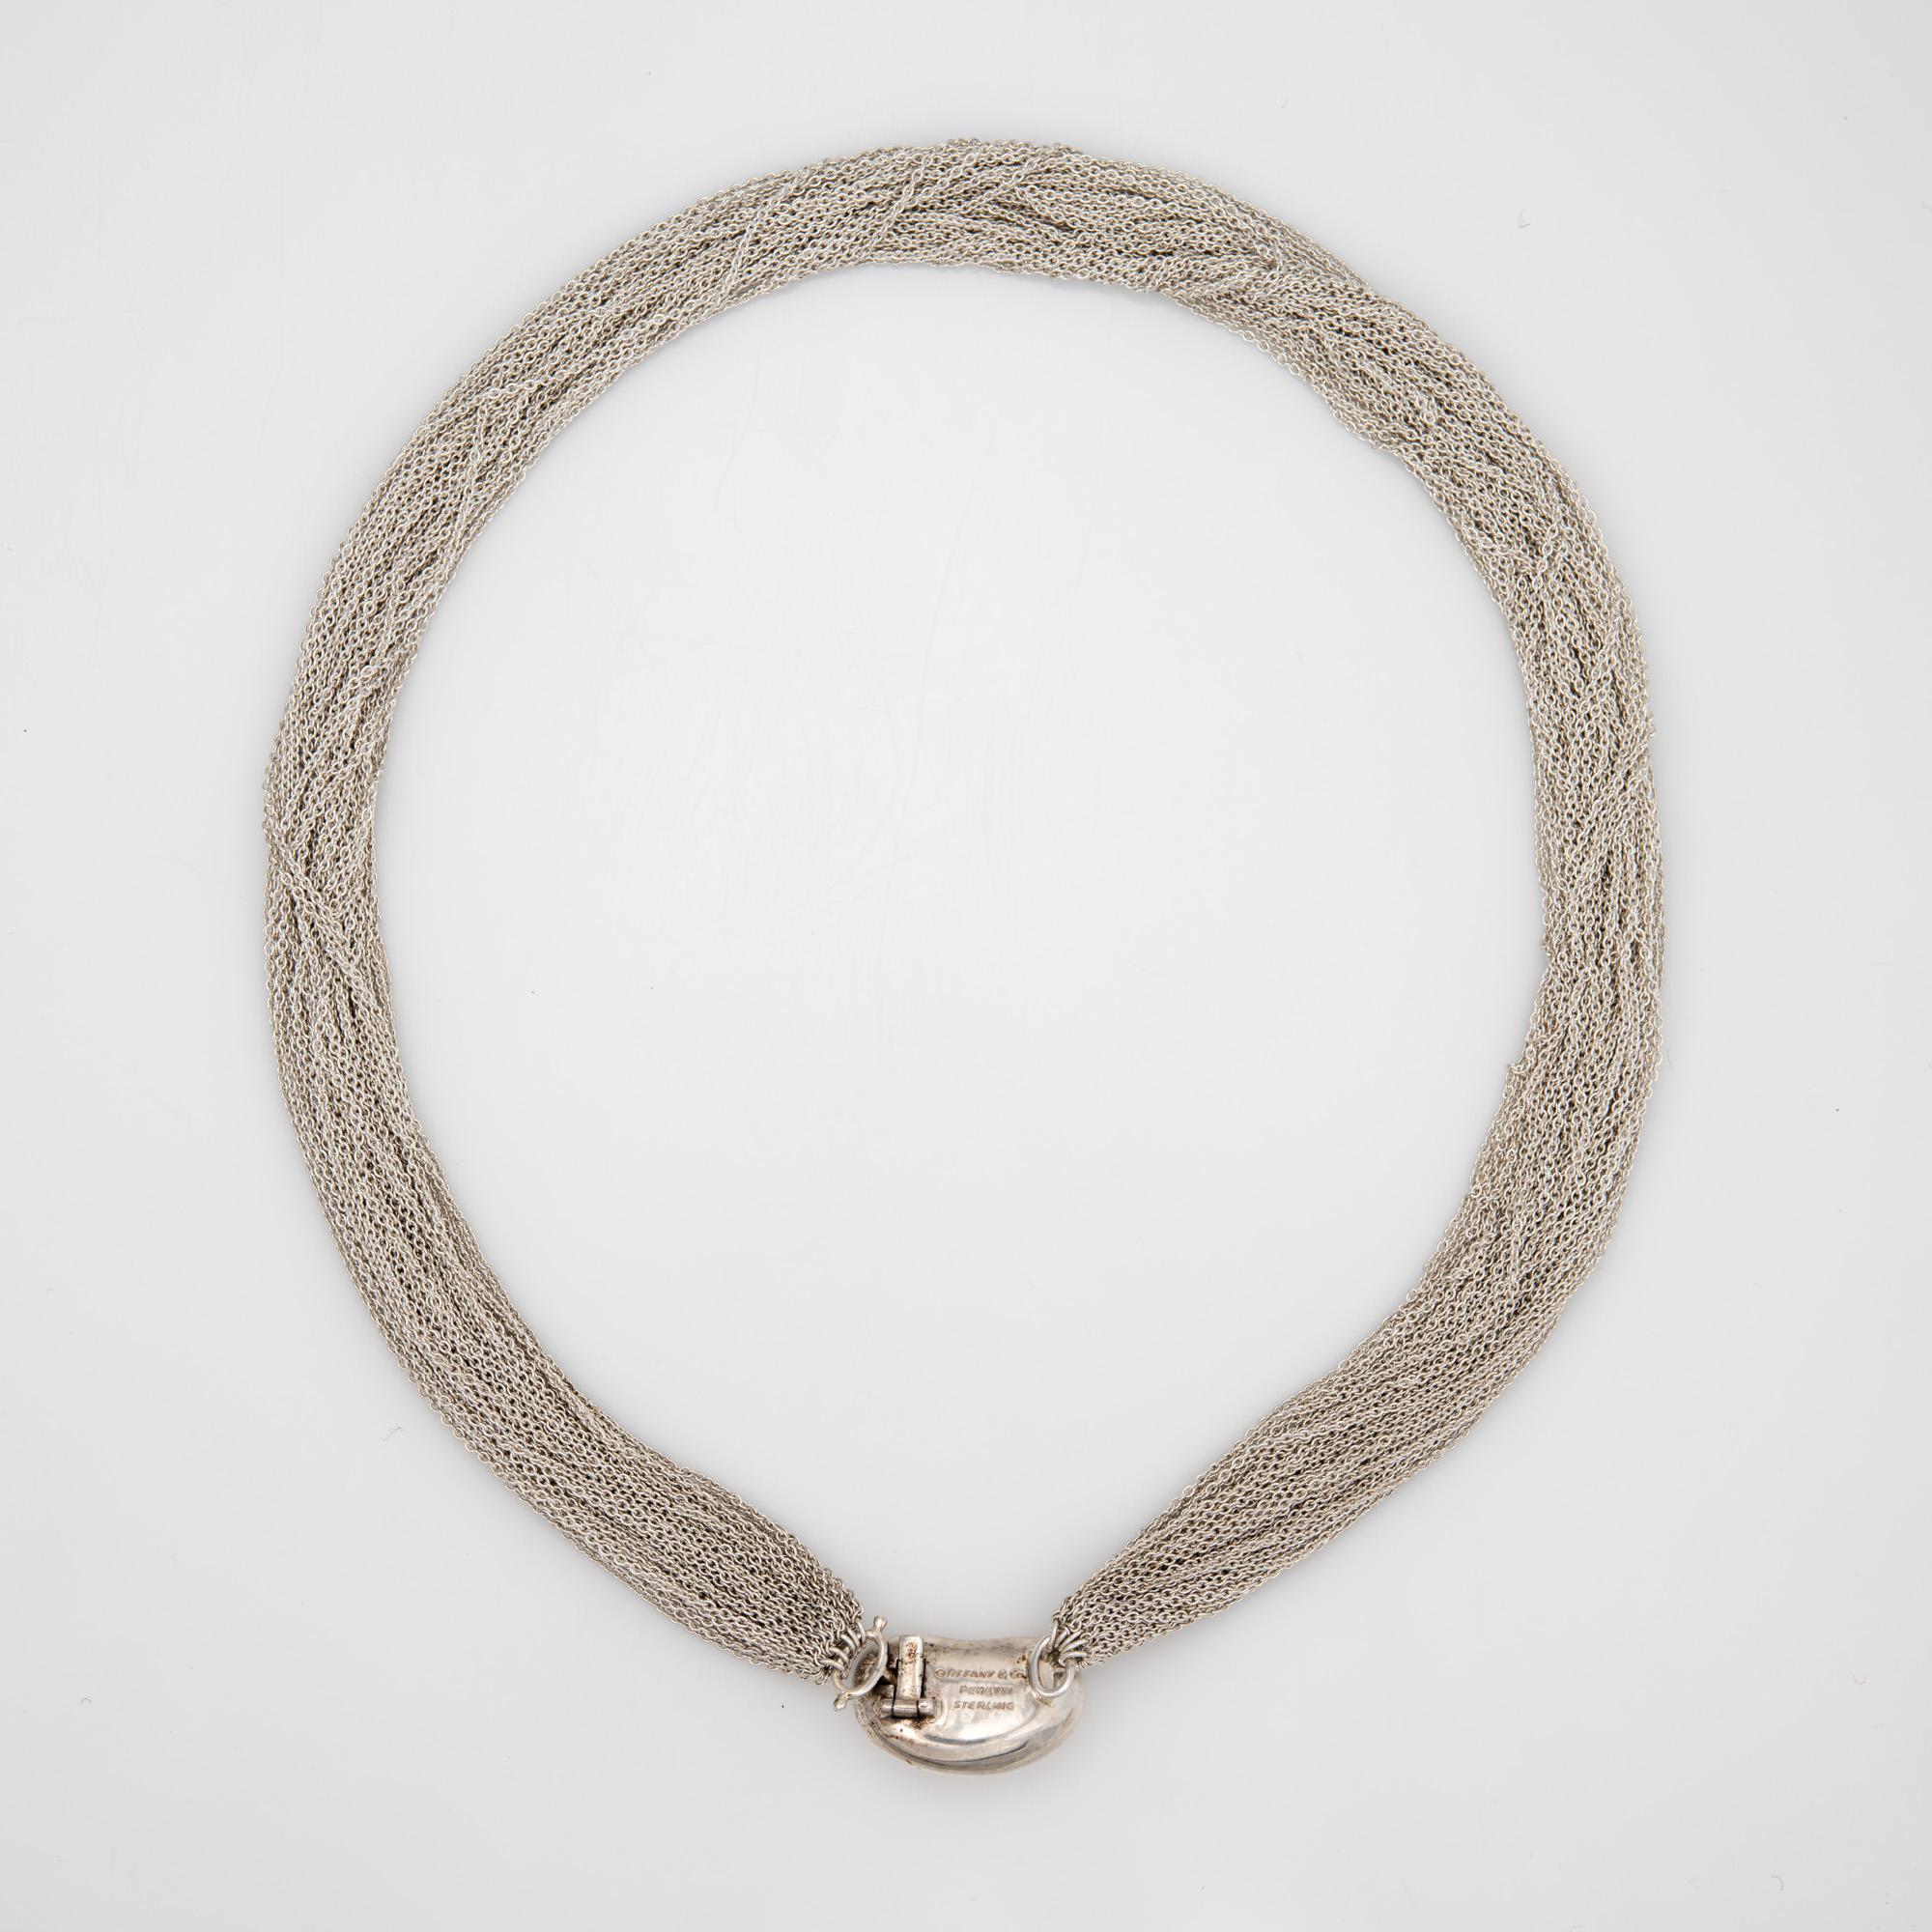 Stylish vintage Tiffany & Co multi-strand bean necklace, crafted in sterling silver (circa 1970s to 1980s).  

The bean clasp is a classic design by Elsa Peretti and is a great example of her early work for Tiffany & Co. A total of 50 stands of